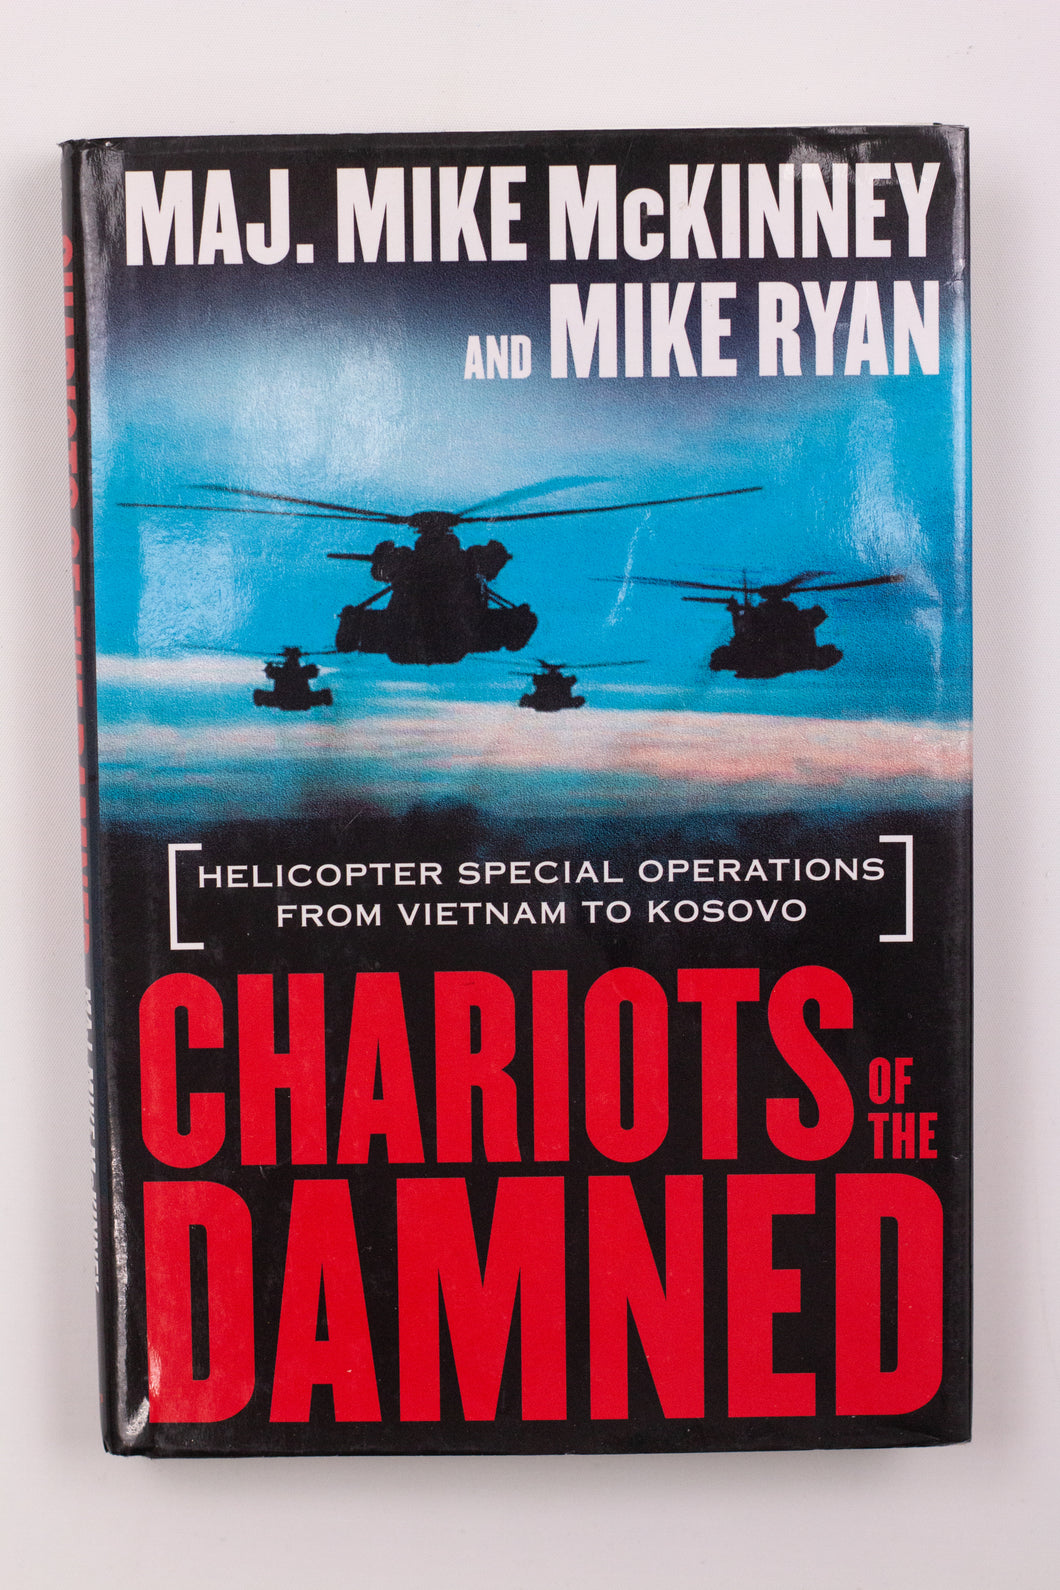 CHARIOTS OF THE DAMNED BOOK